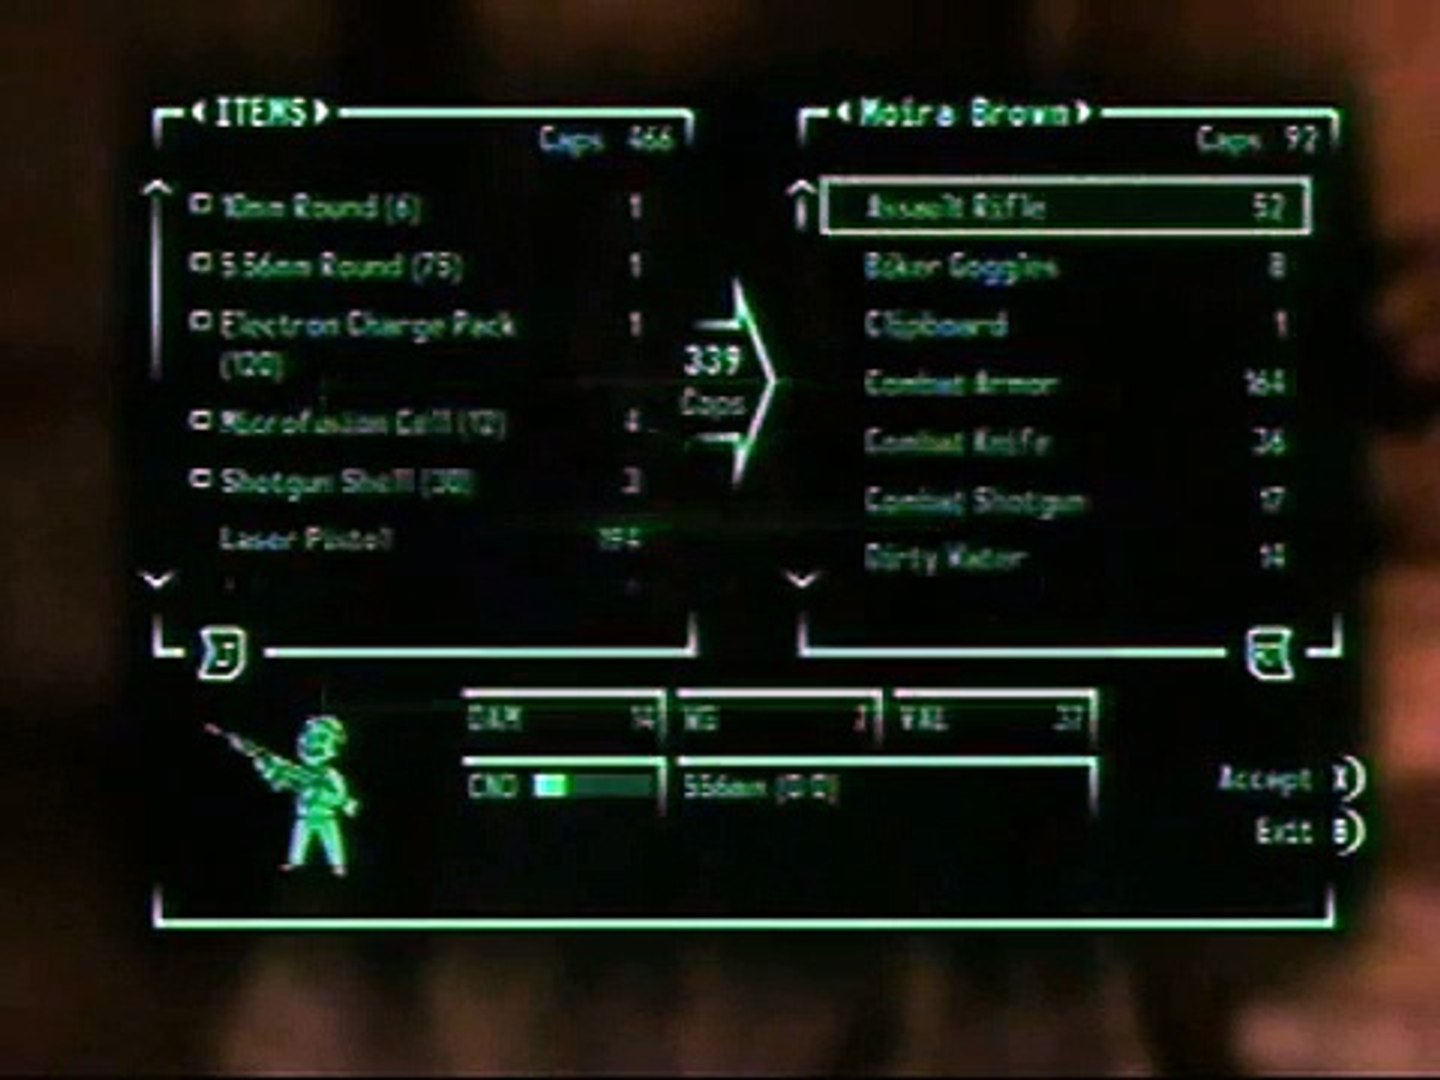 Fallout 3 Infinite Caps and Items Shop Glitch on Xbox360 - video